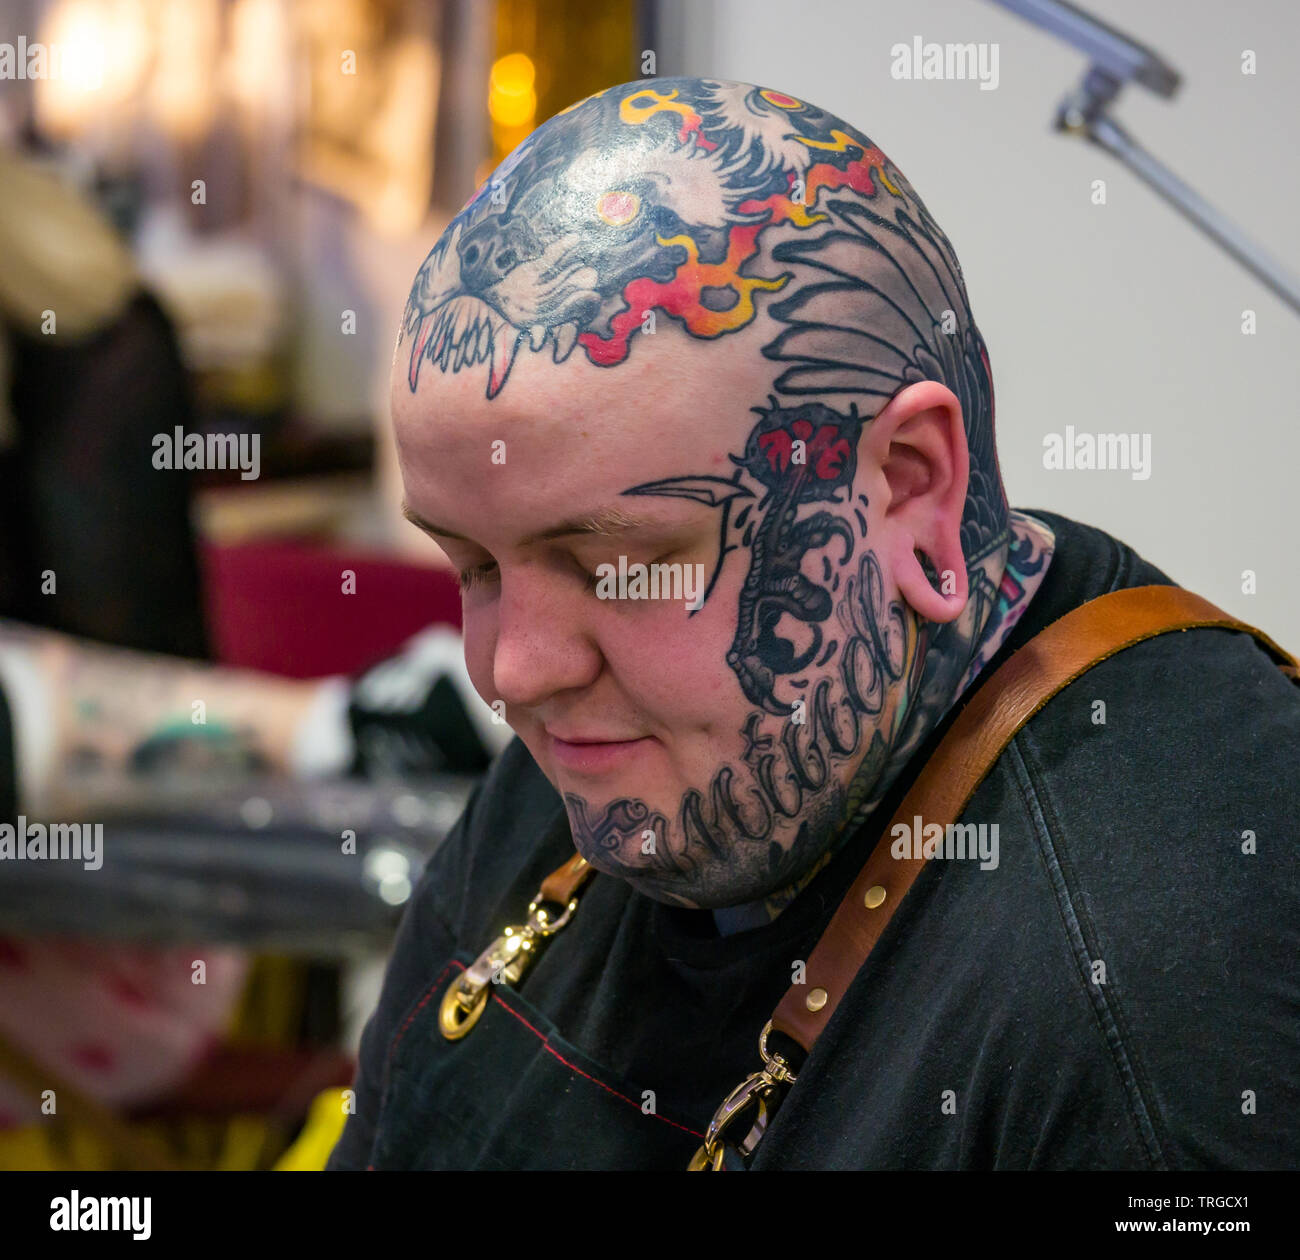 Corn Exchange, Edinburgh, Scotland, UK, 9th Annual Scottish Tattoo  Convention: Enthusiasts and tattoo artists with attendee getting a tattoo  Stock Photo - Alamy